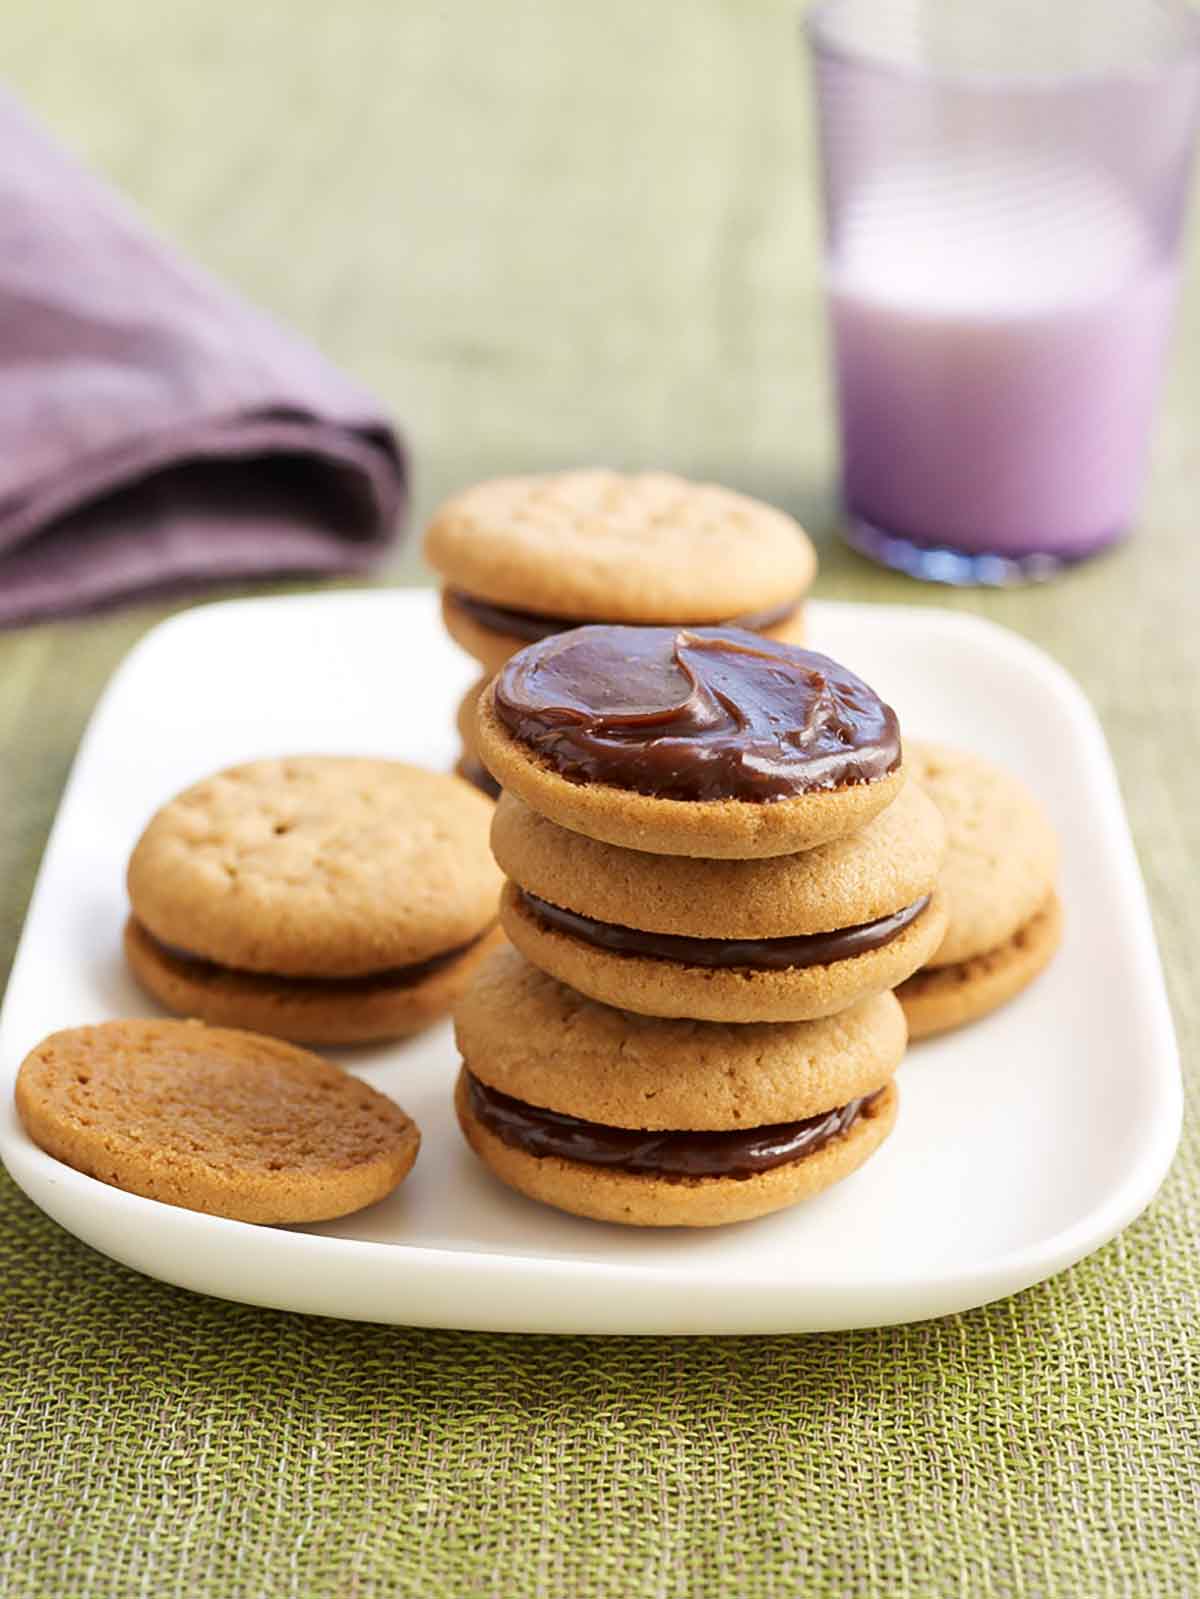 Peanut butter sandwich cookies stacked on a plate, the top one is without its top cookie. A glass of milk is in the background.